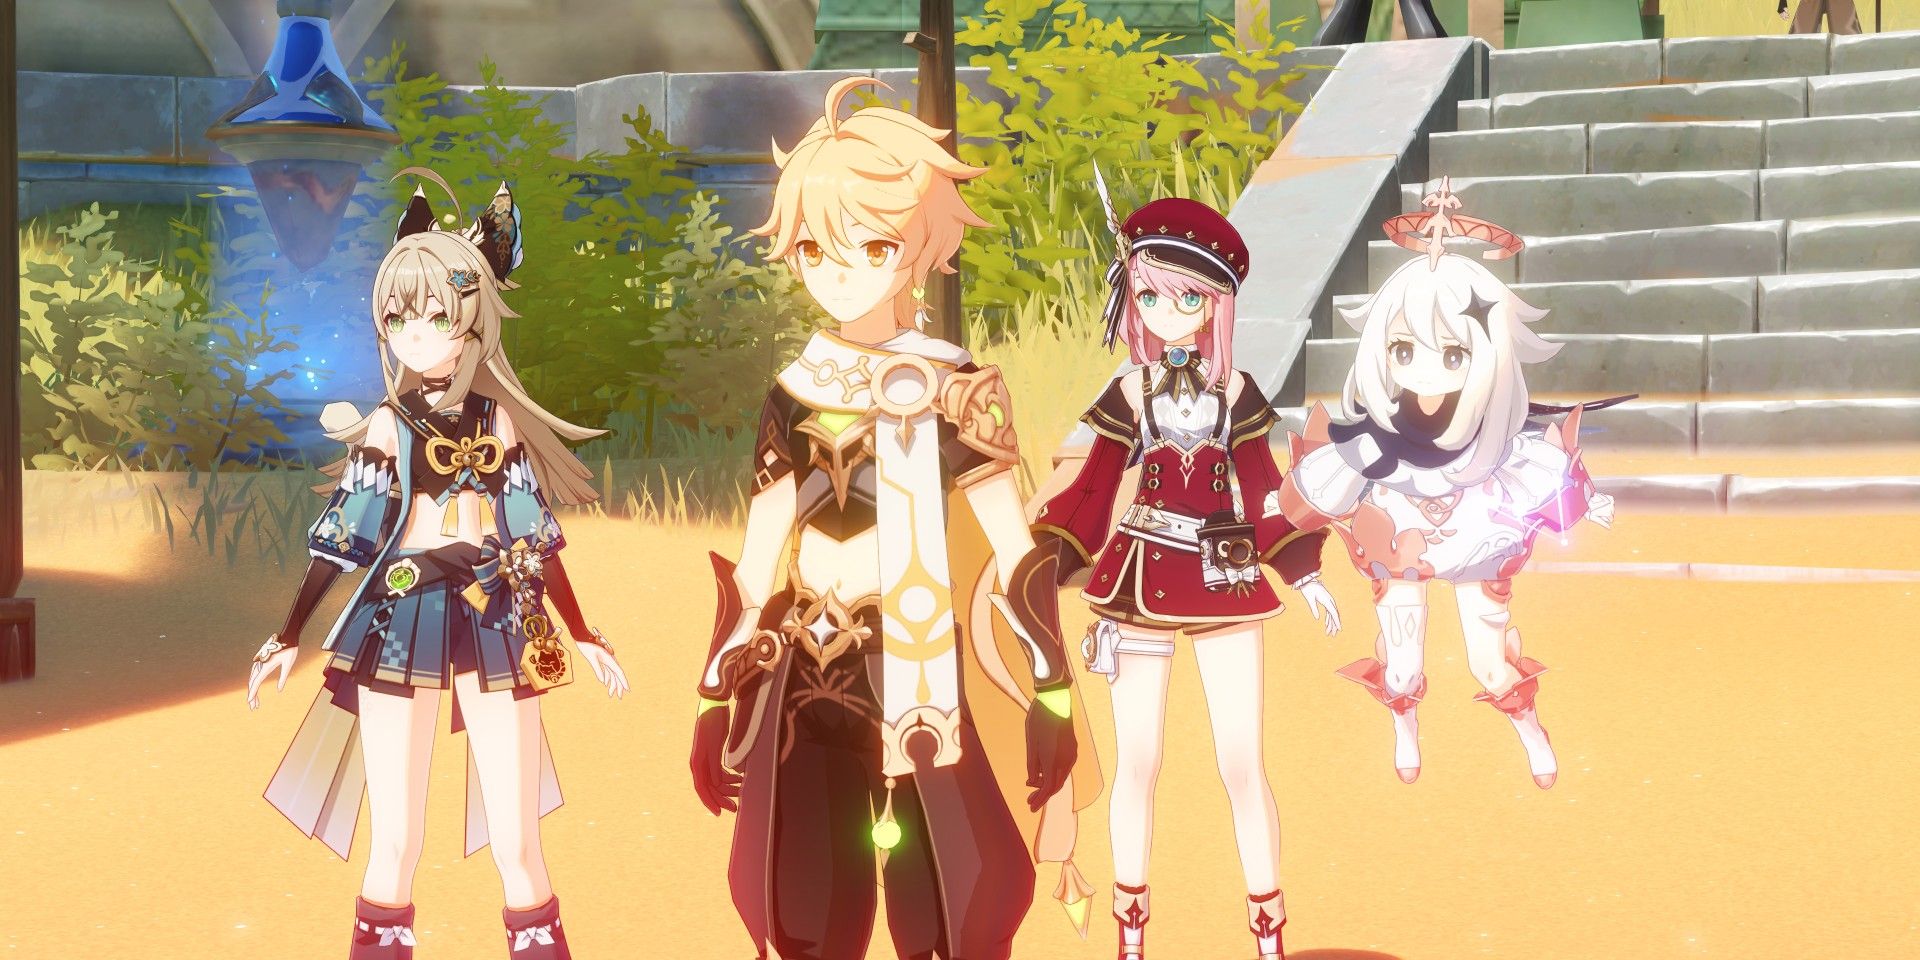 Genshin Impact's Kirara stands to the left, the male Traveler slightly to the right, Charlotte behind him to the right, and Paimon to the right. They look at something off-camera in the desert. There is a Teleport Waypoint behind them.